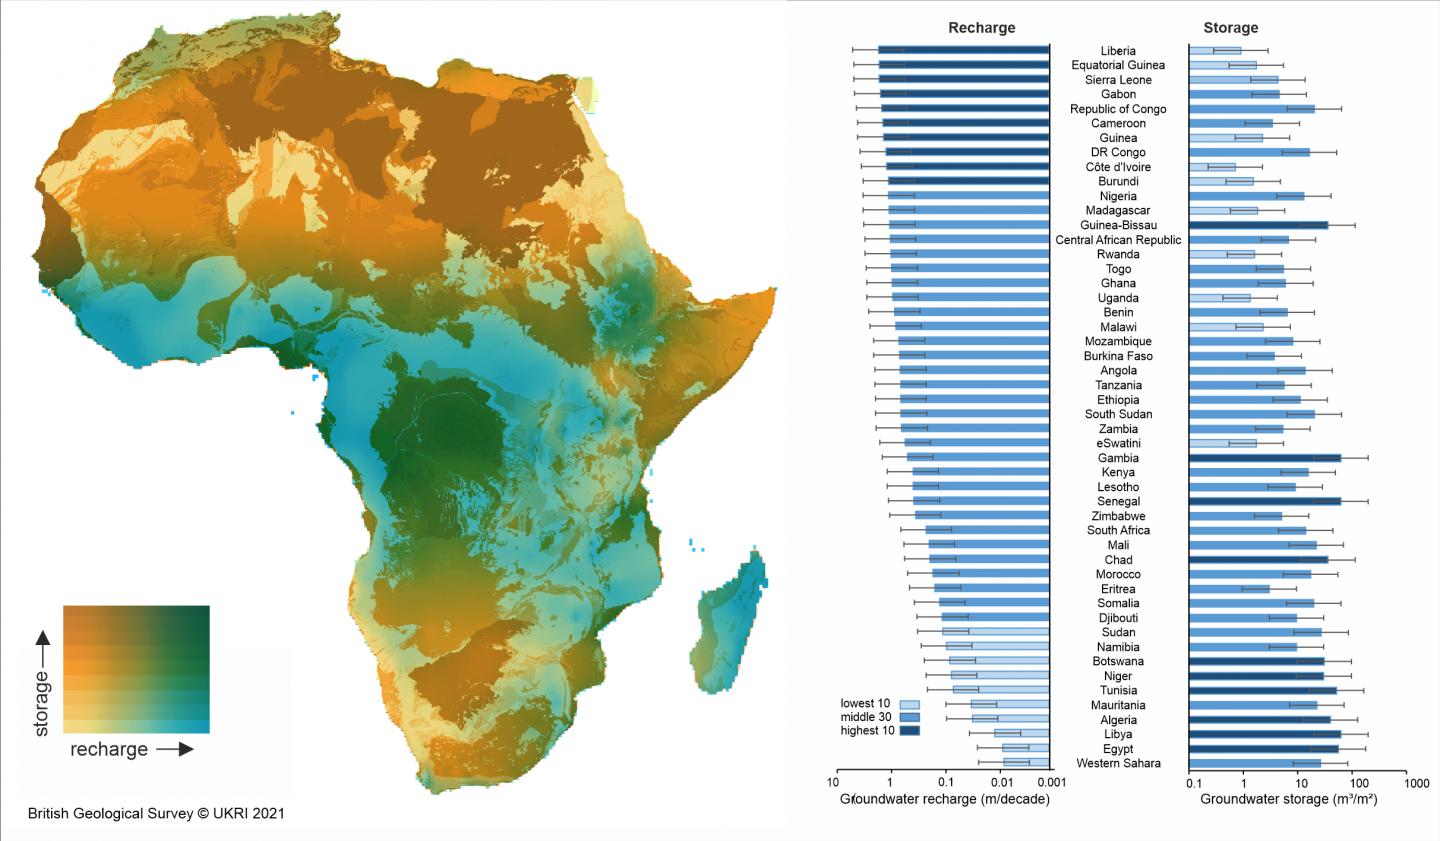 Average groundwater recharge fluxes and groundwater storage for each African  country